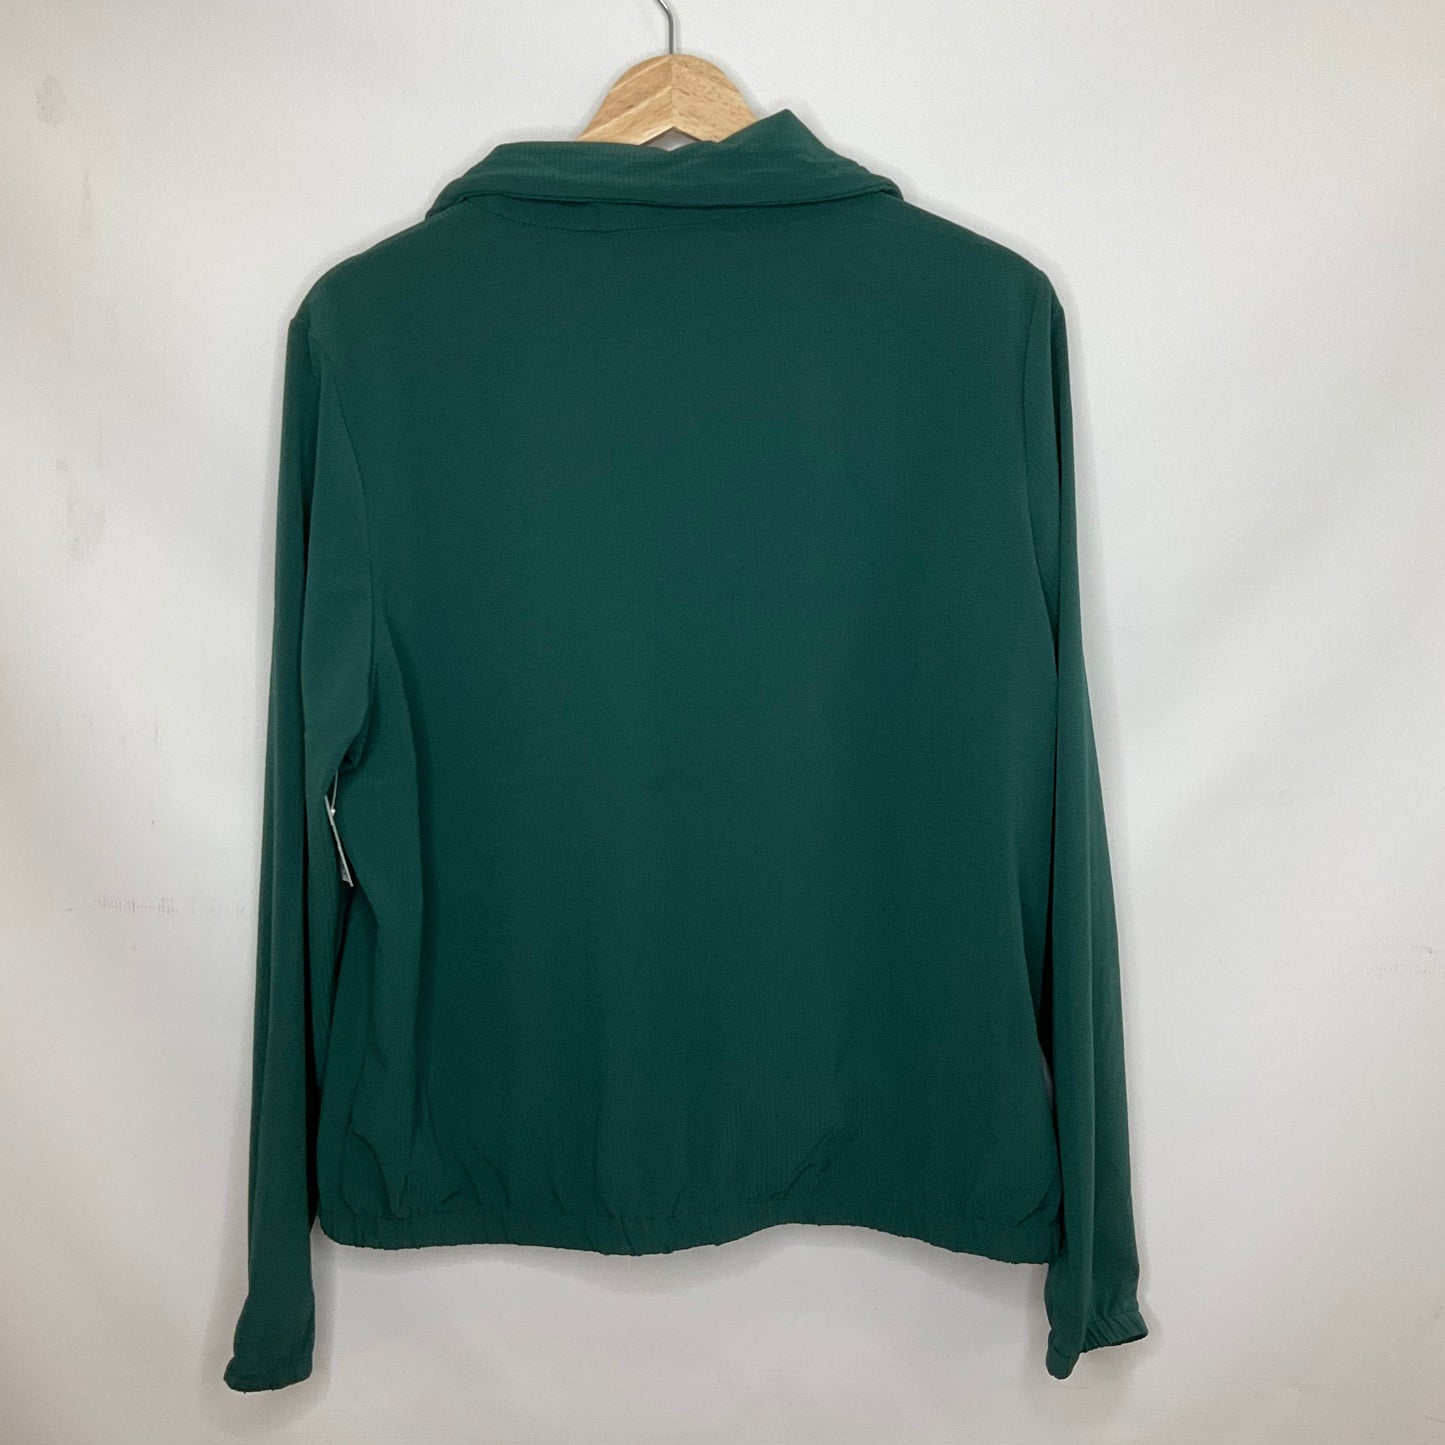 Green Athletic Top Long Sleeve Collar New Balance, Size L